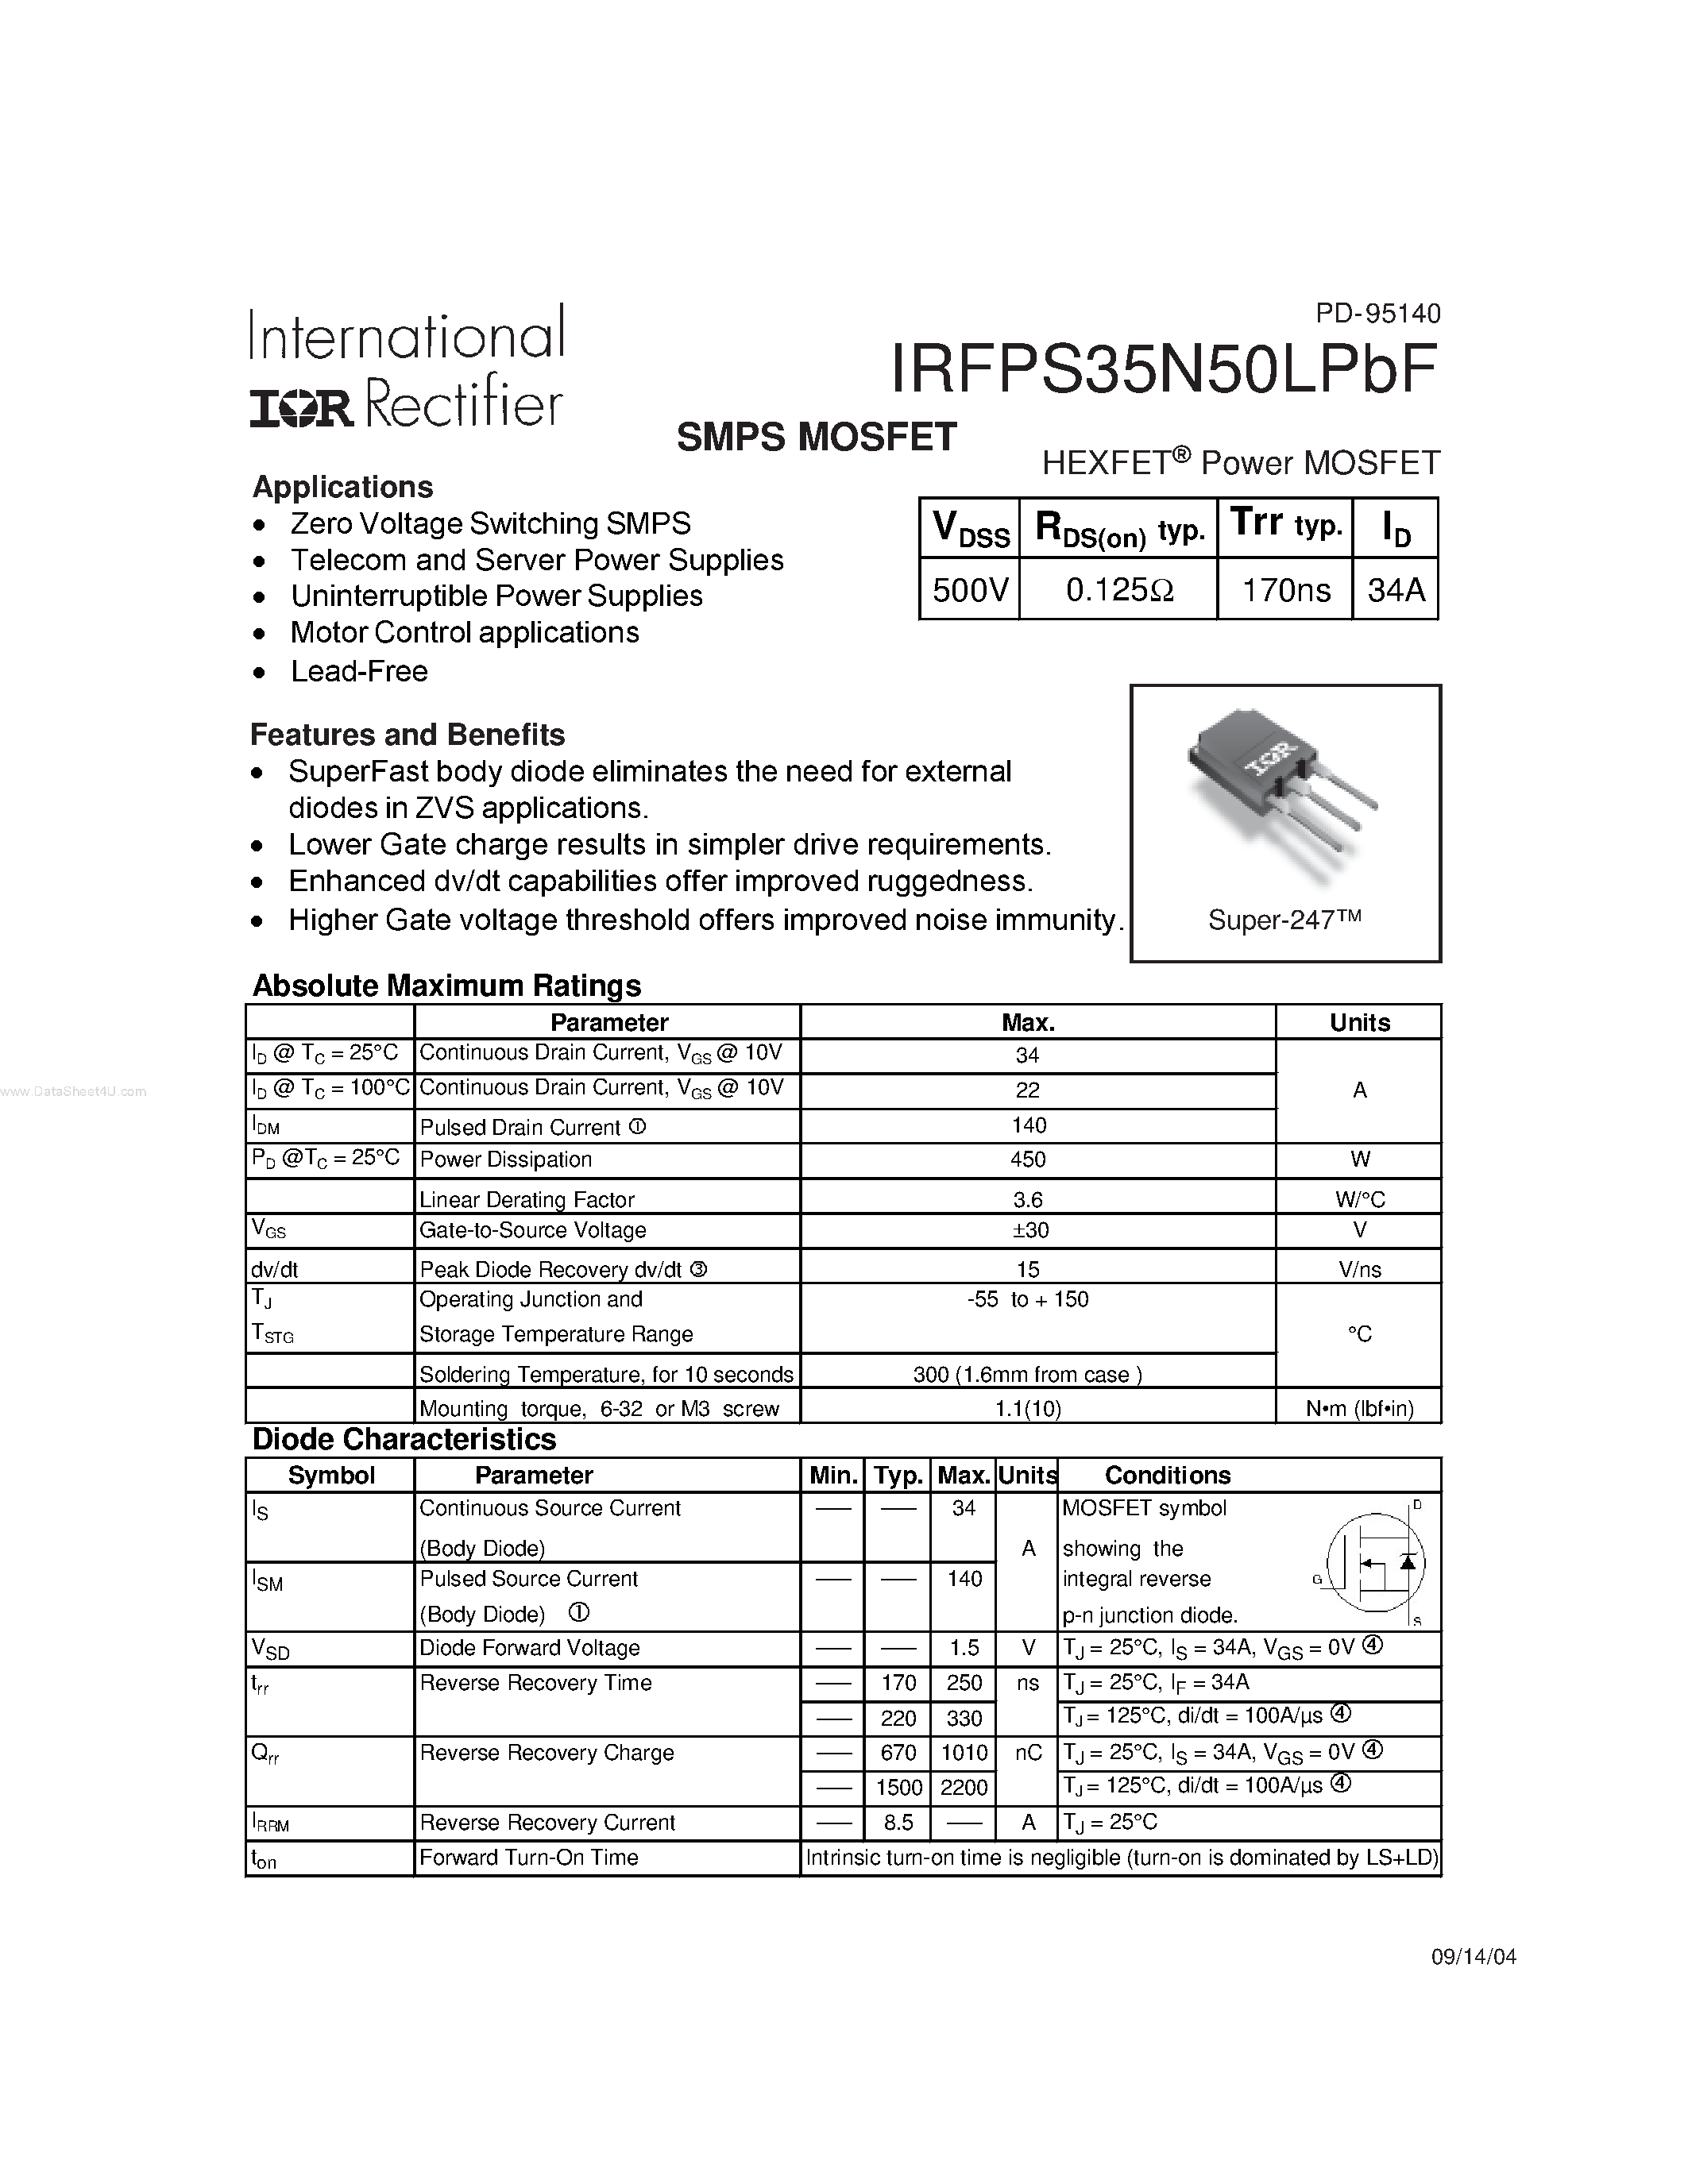 Даташит IRFPS35N50LPBF - SMPS MOSFET страница 1